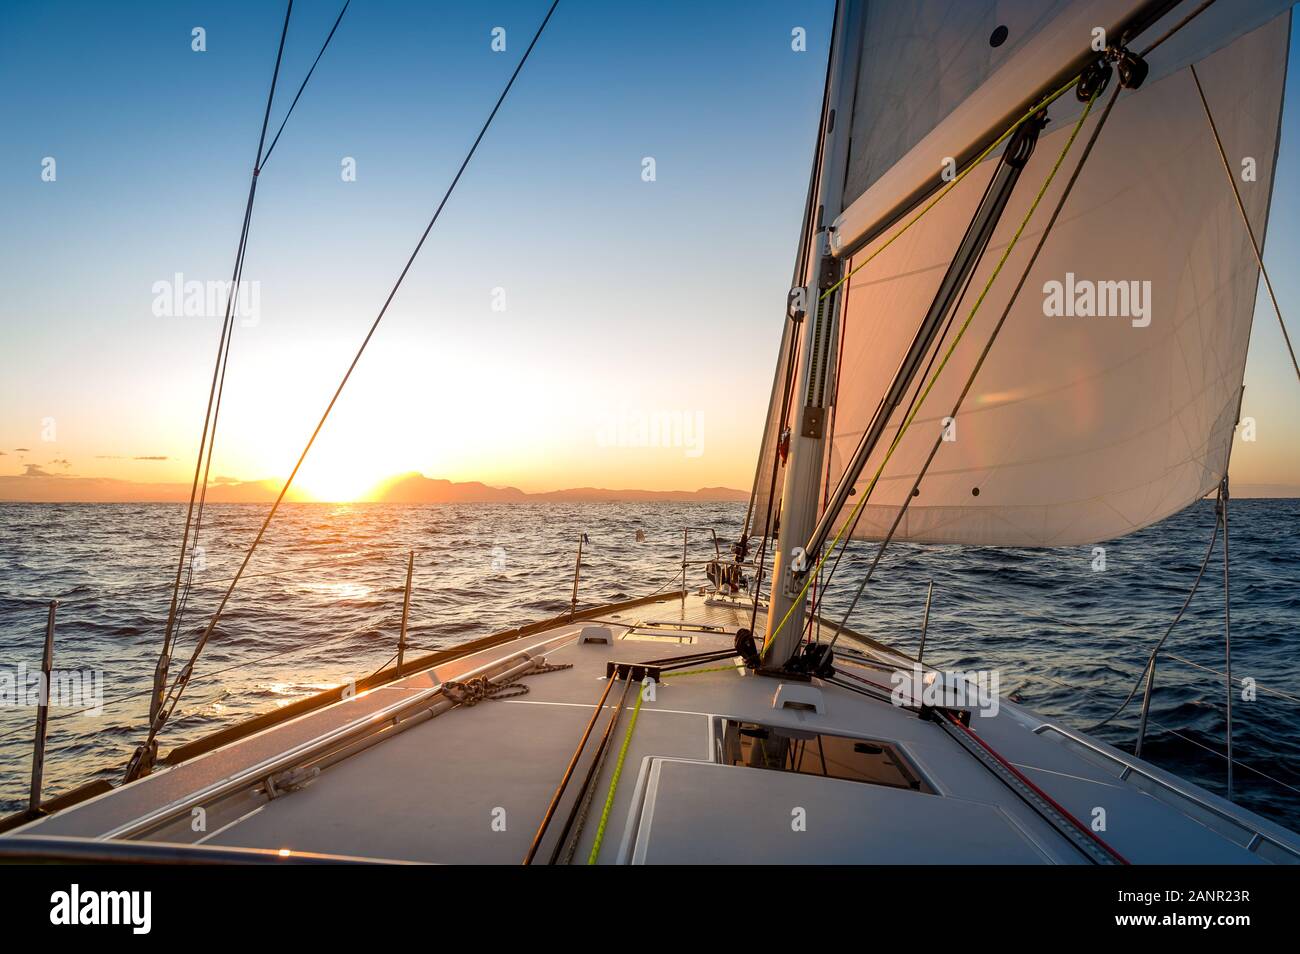 Chasing the sun at sailing yacht. Deck and sails of sailoat pointing to the sunrise. Mediterranean sea, Italy. Stock Photo